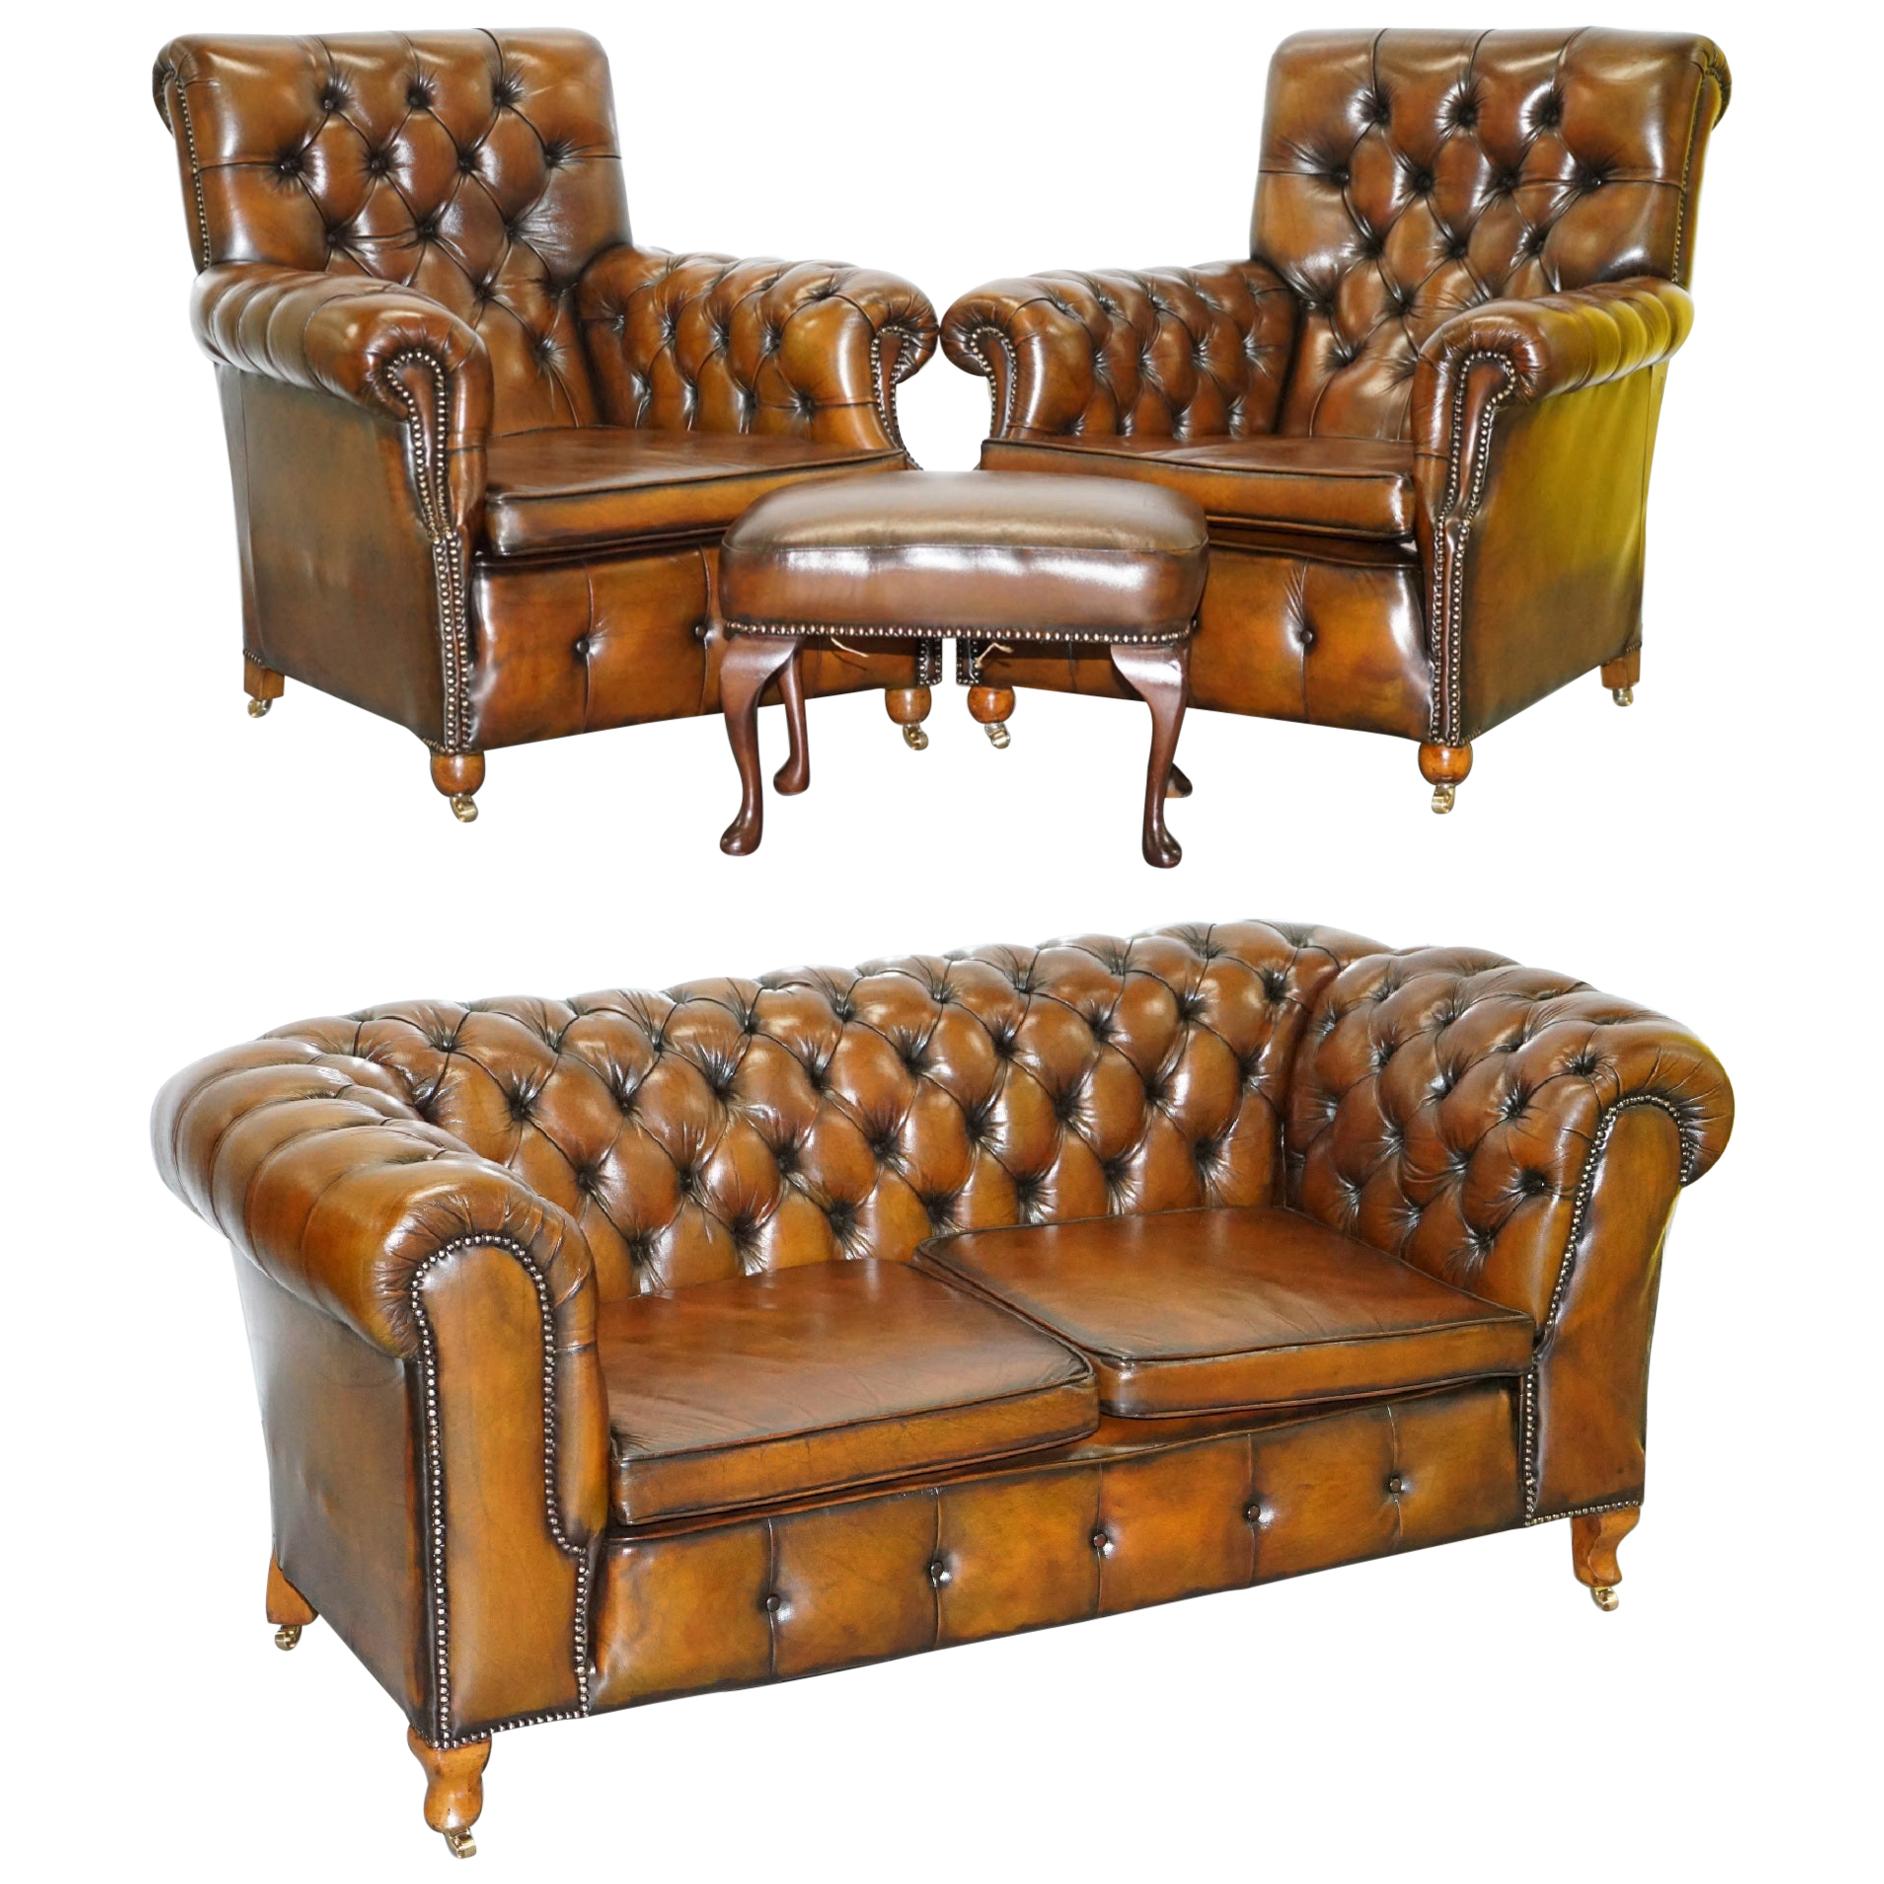 Restored Victorian Brown Leather Chesterfield Club Armchair Drop Arm Sofa Suite